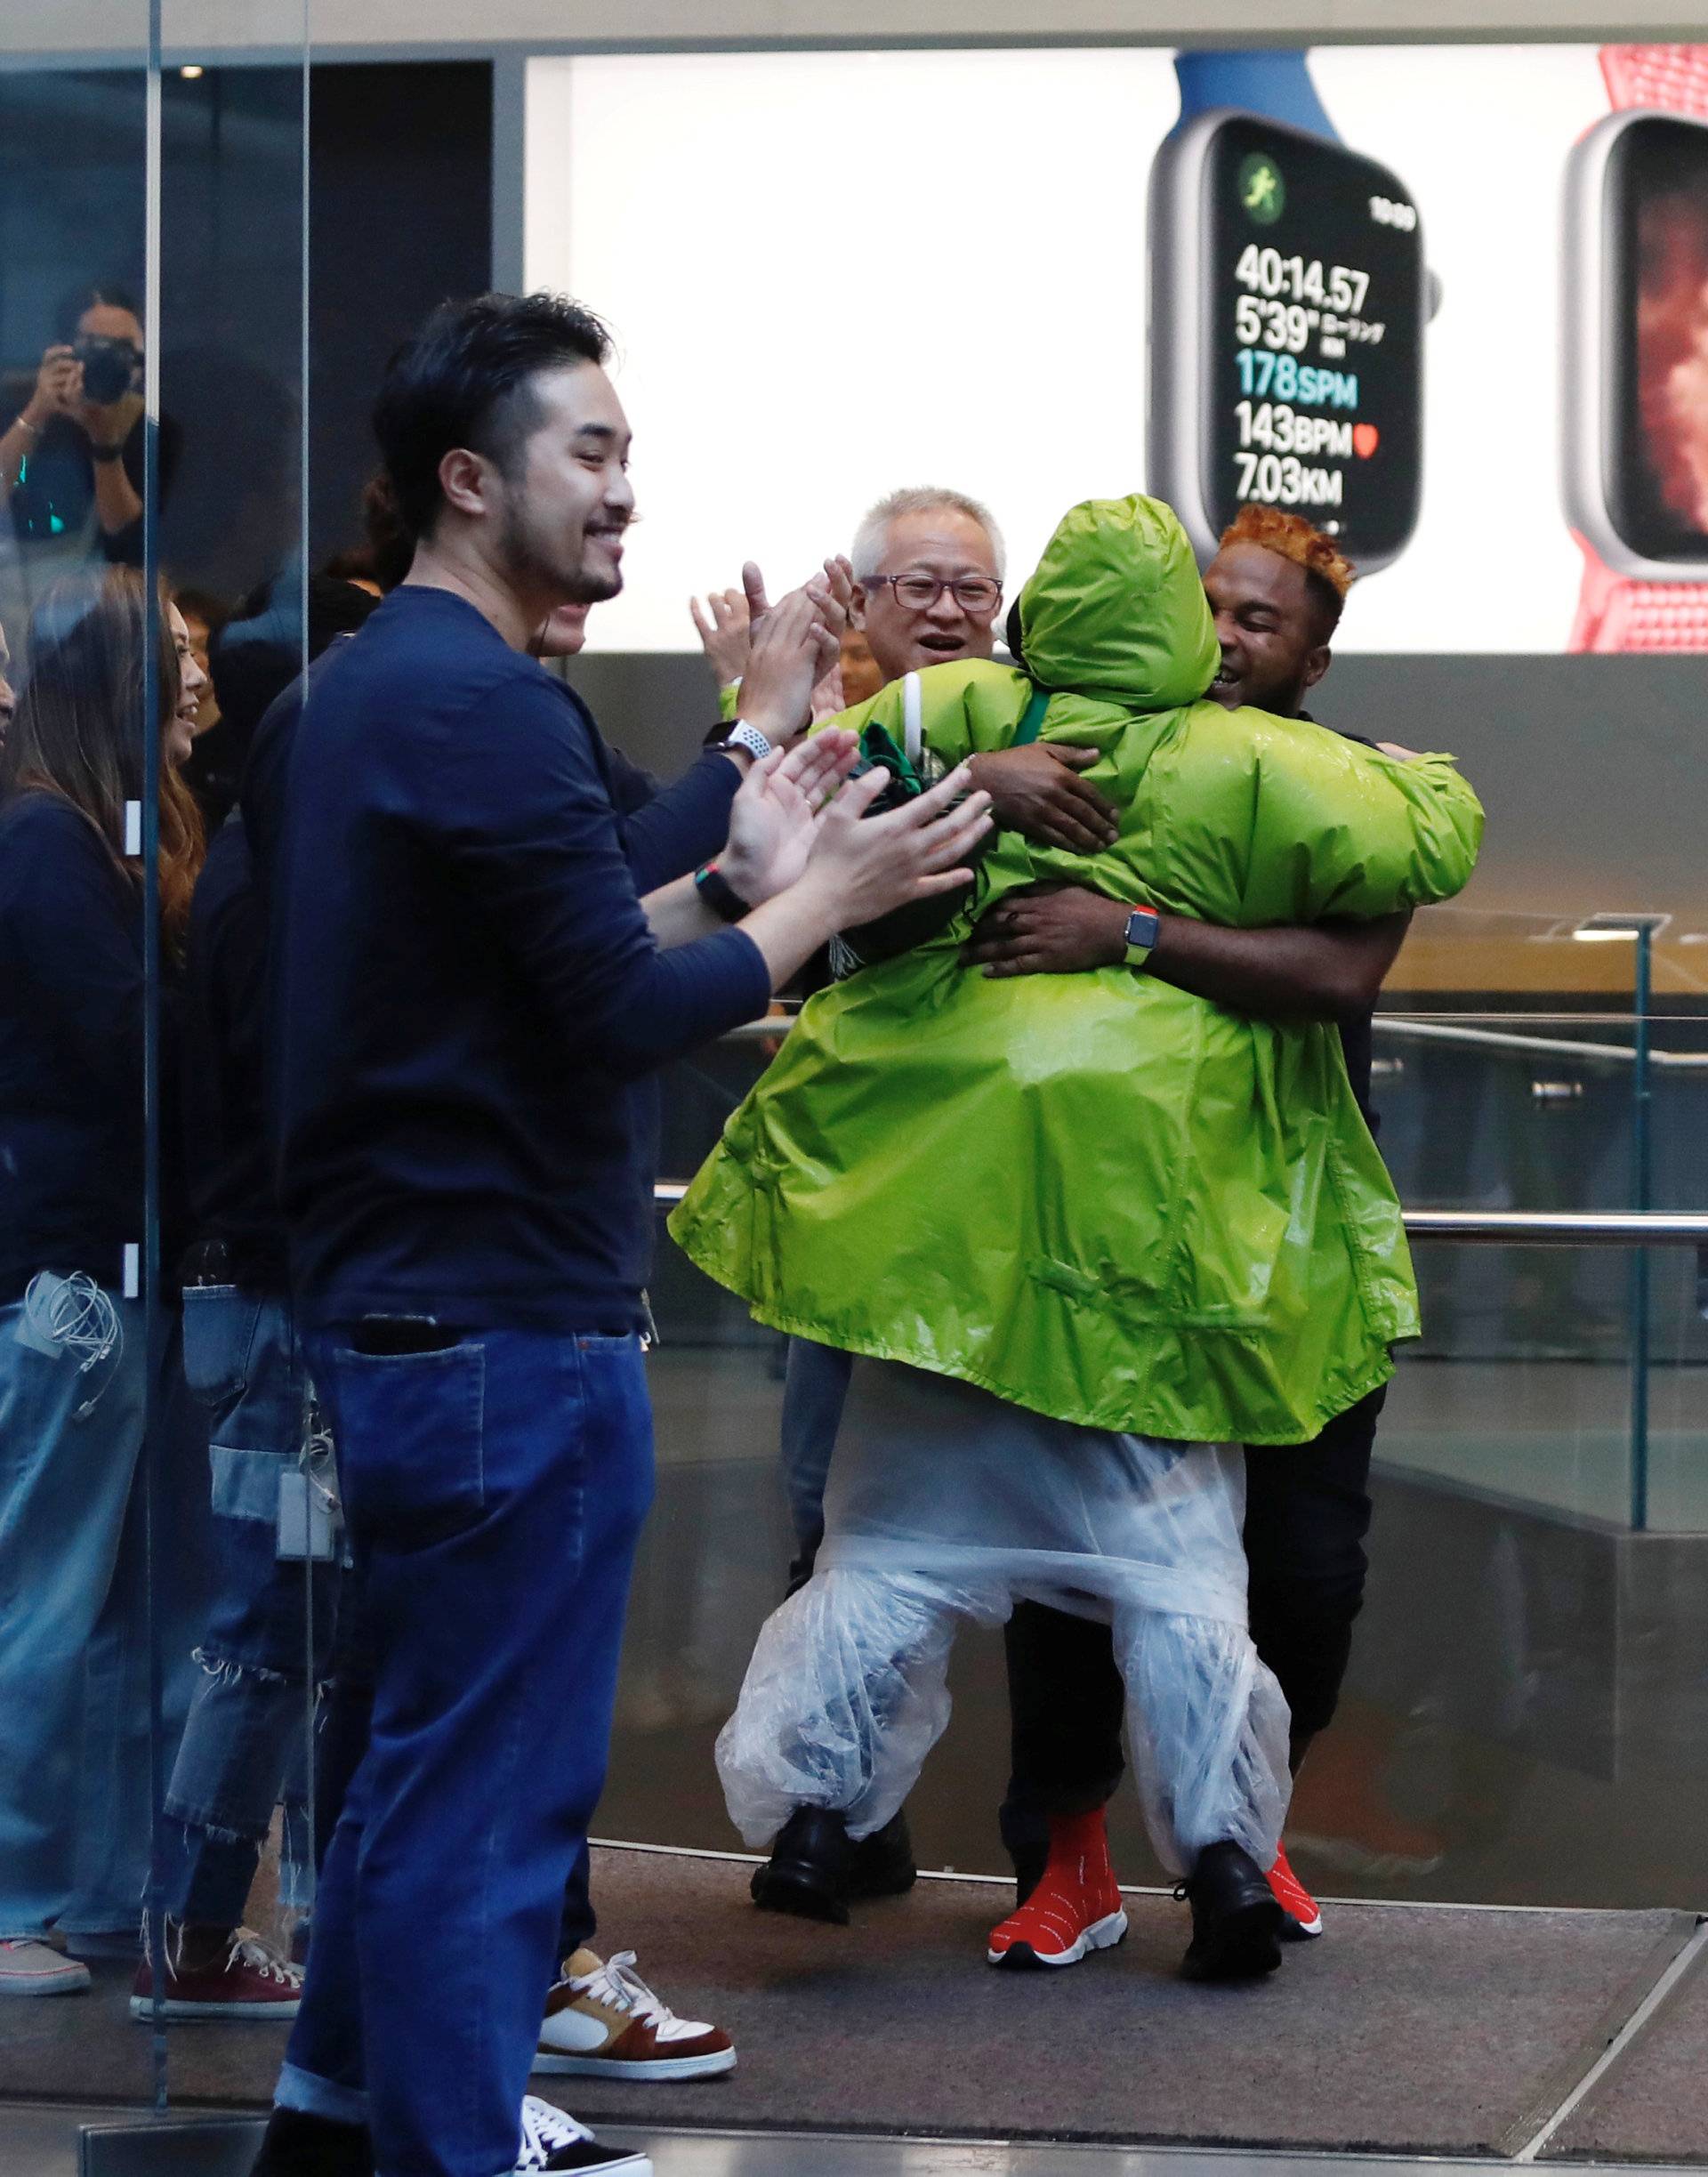 Apple Store staff greets customers who have been waiting in line to purchase Apple's new iPhone XS and XS Max in Tokyo